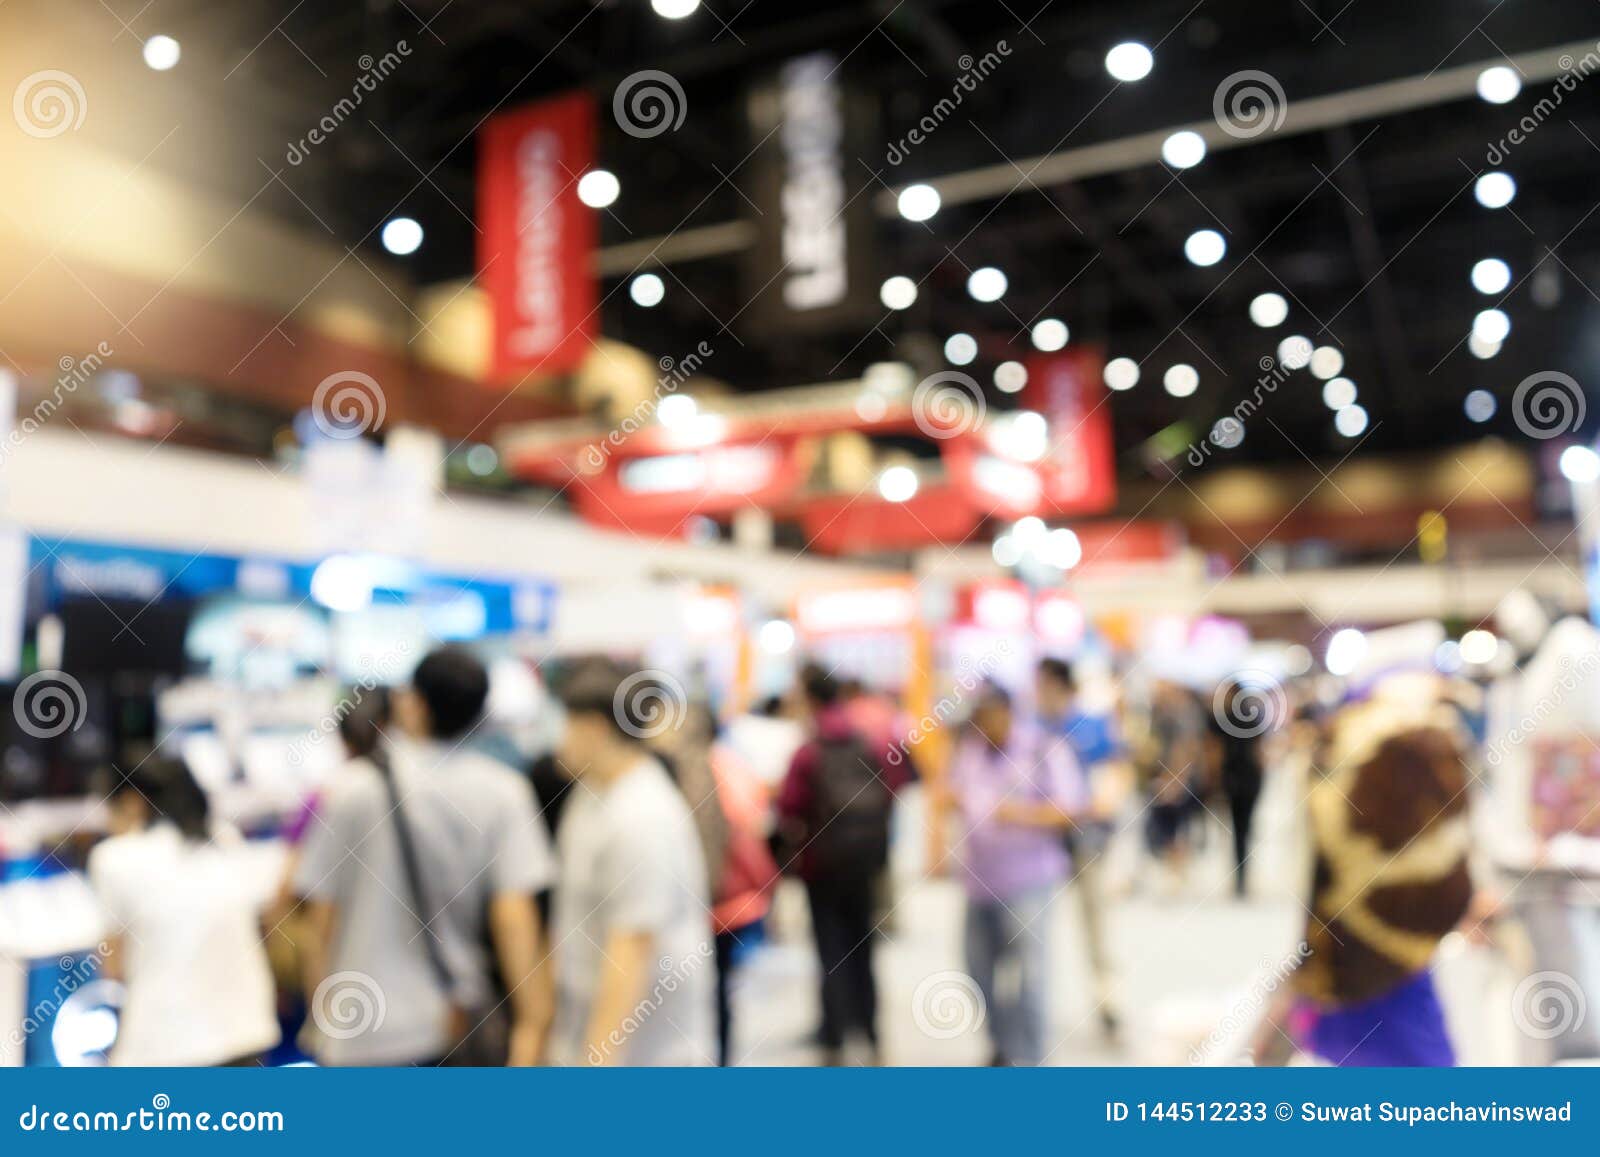 blur trade fair show exhibition hall for background